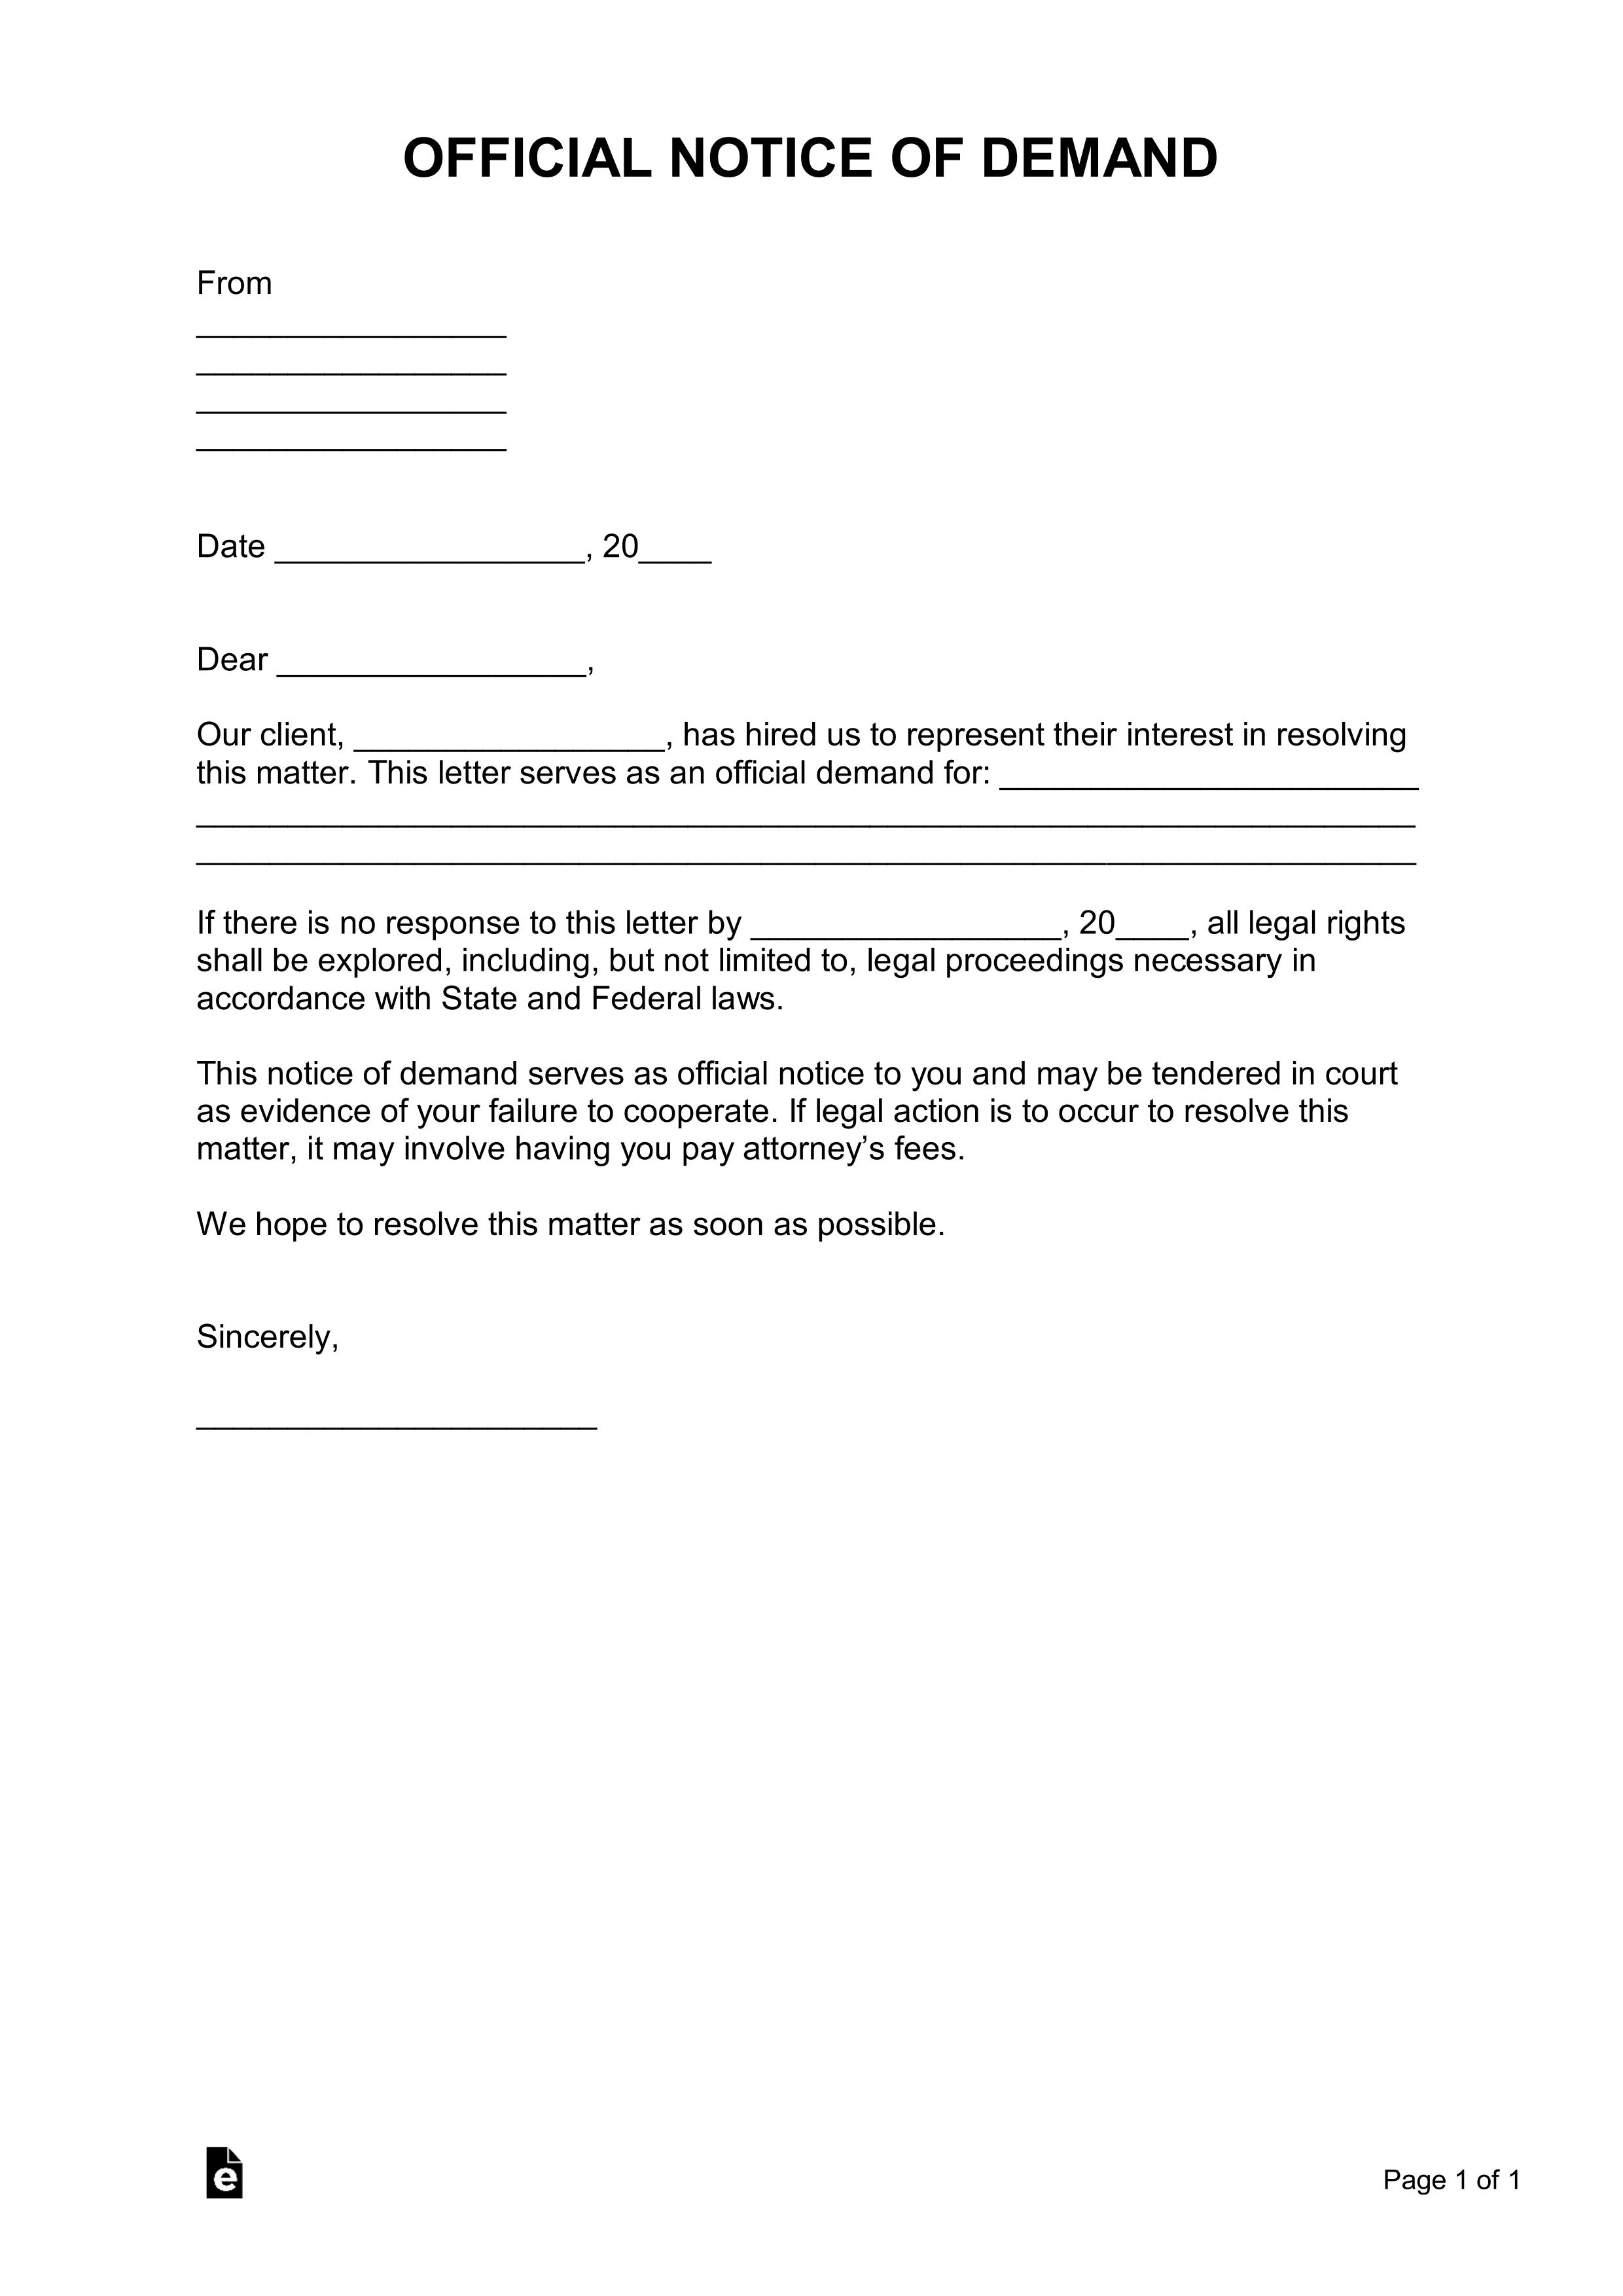 Demand Letter Template from Attorney